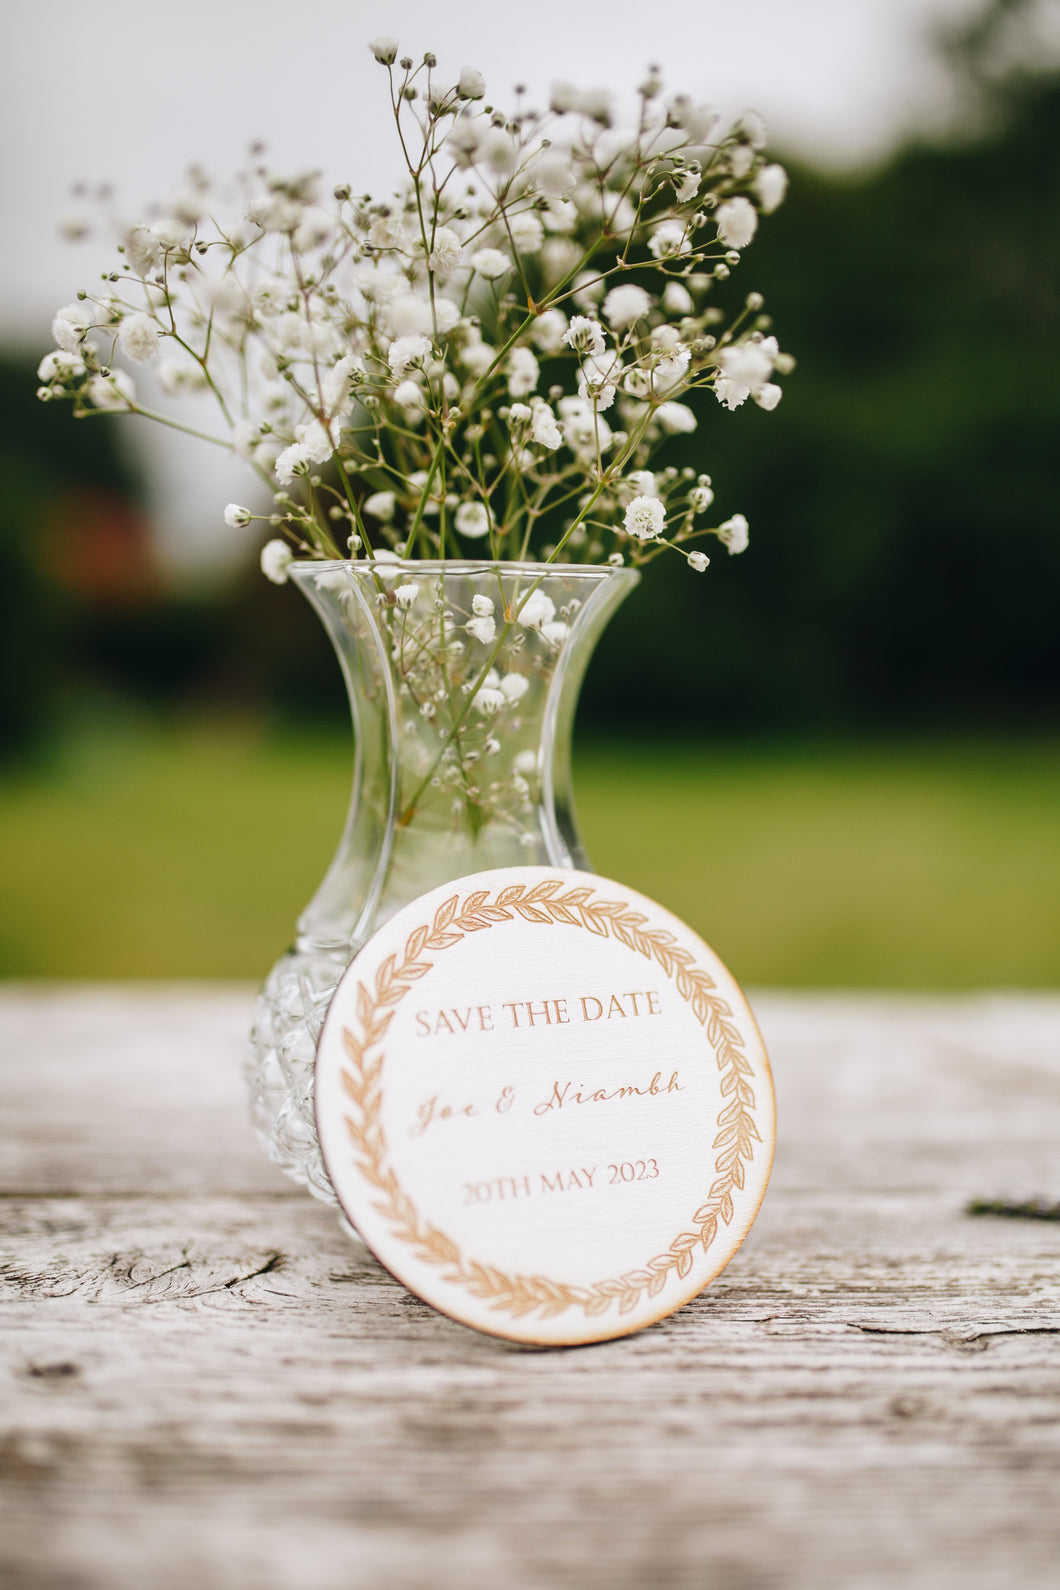 Save the Date/Evening Leaf Personalised White Wooden Engraved Circle